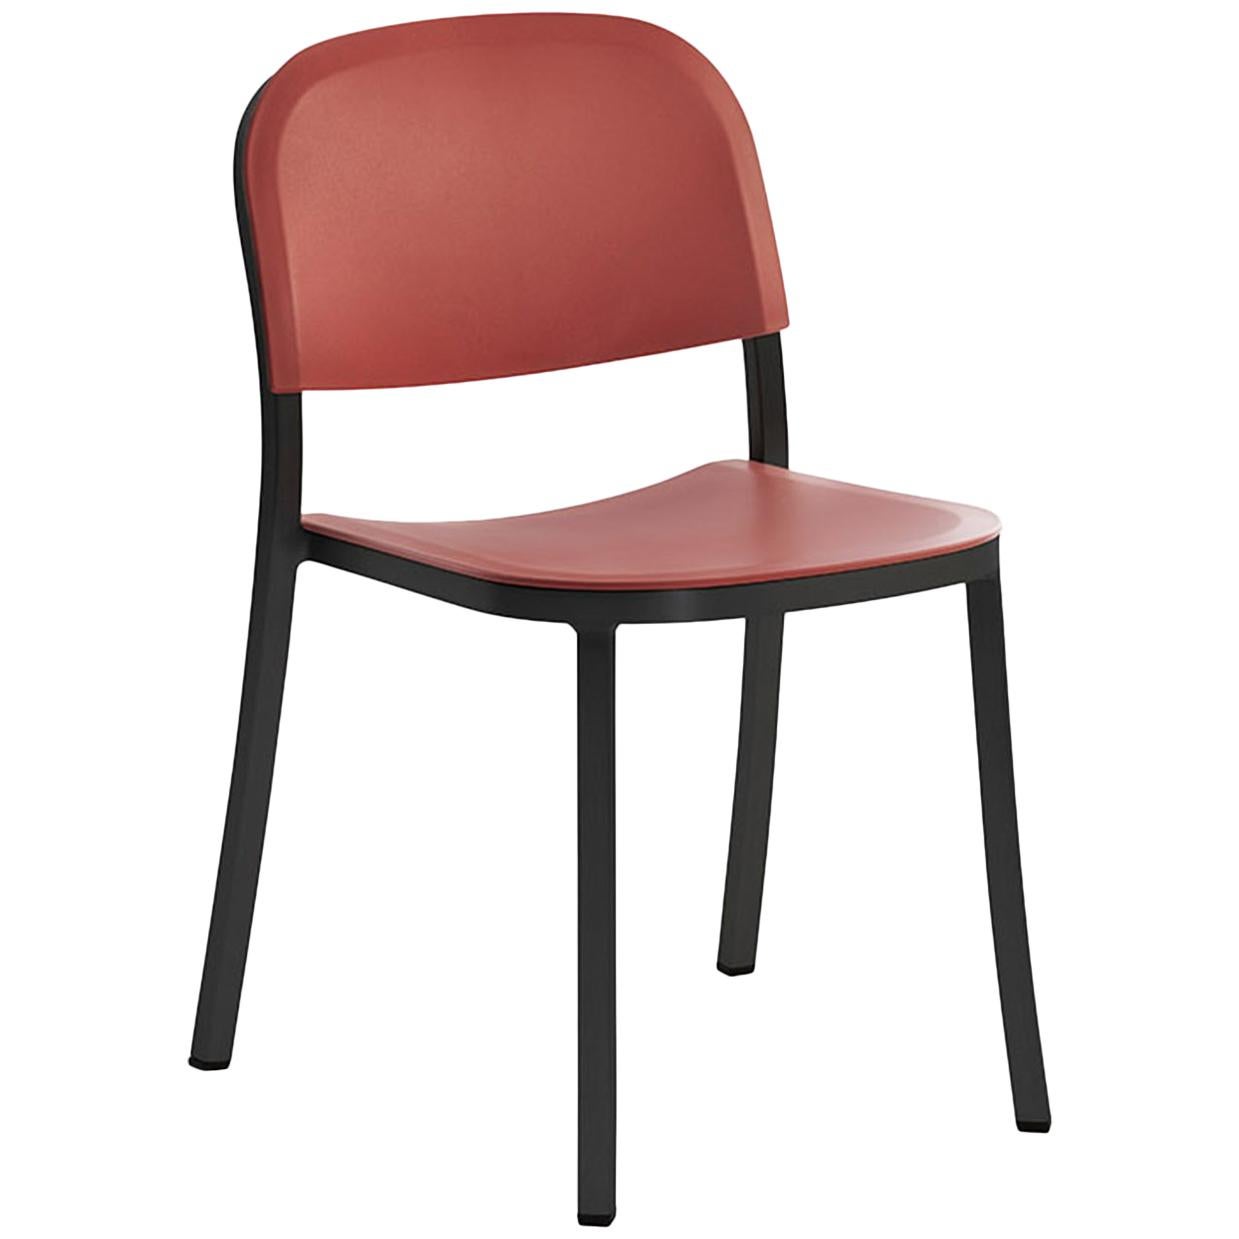 Emeco 1 Inch Stacking Chair in Dark Aluminum and Red Ochre by Jasper Morrison